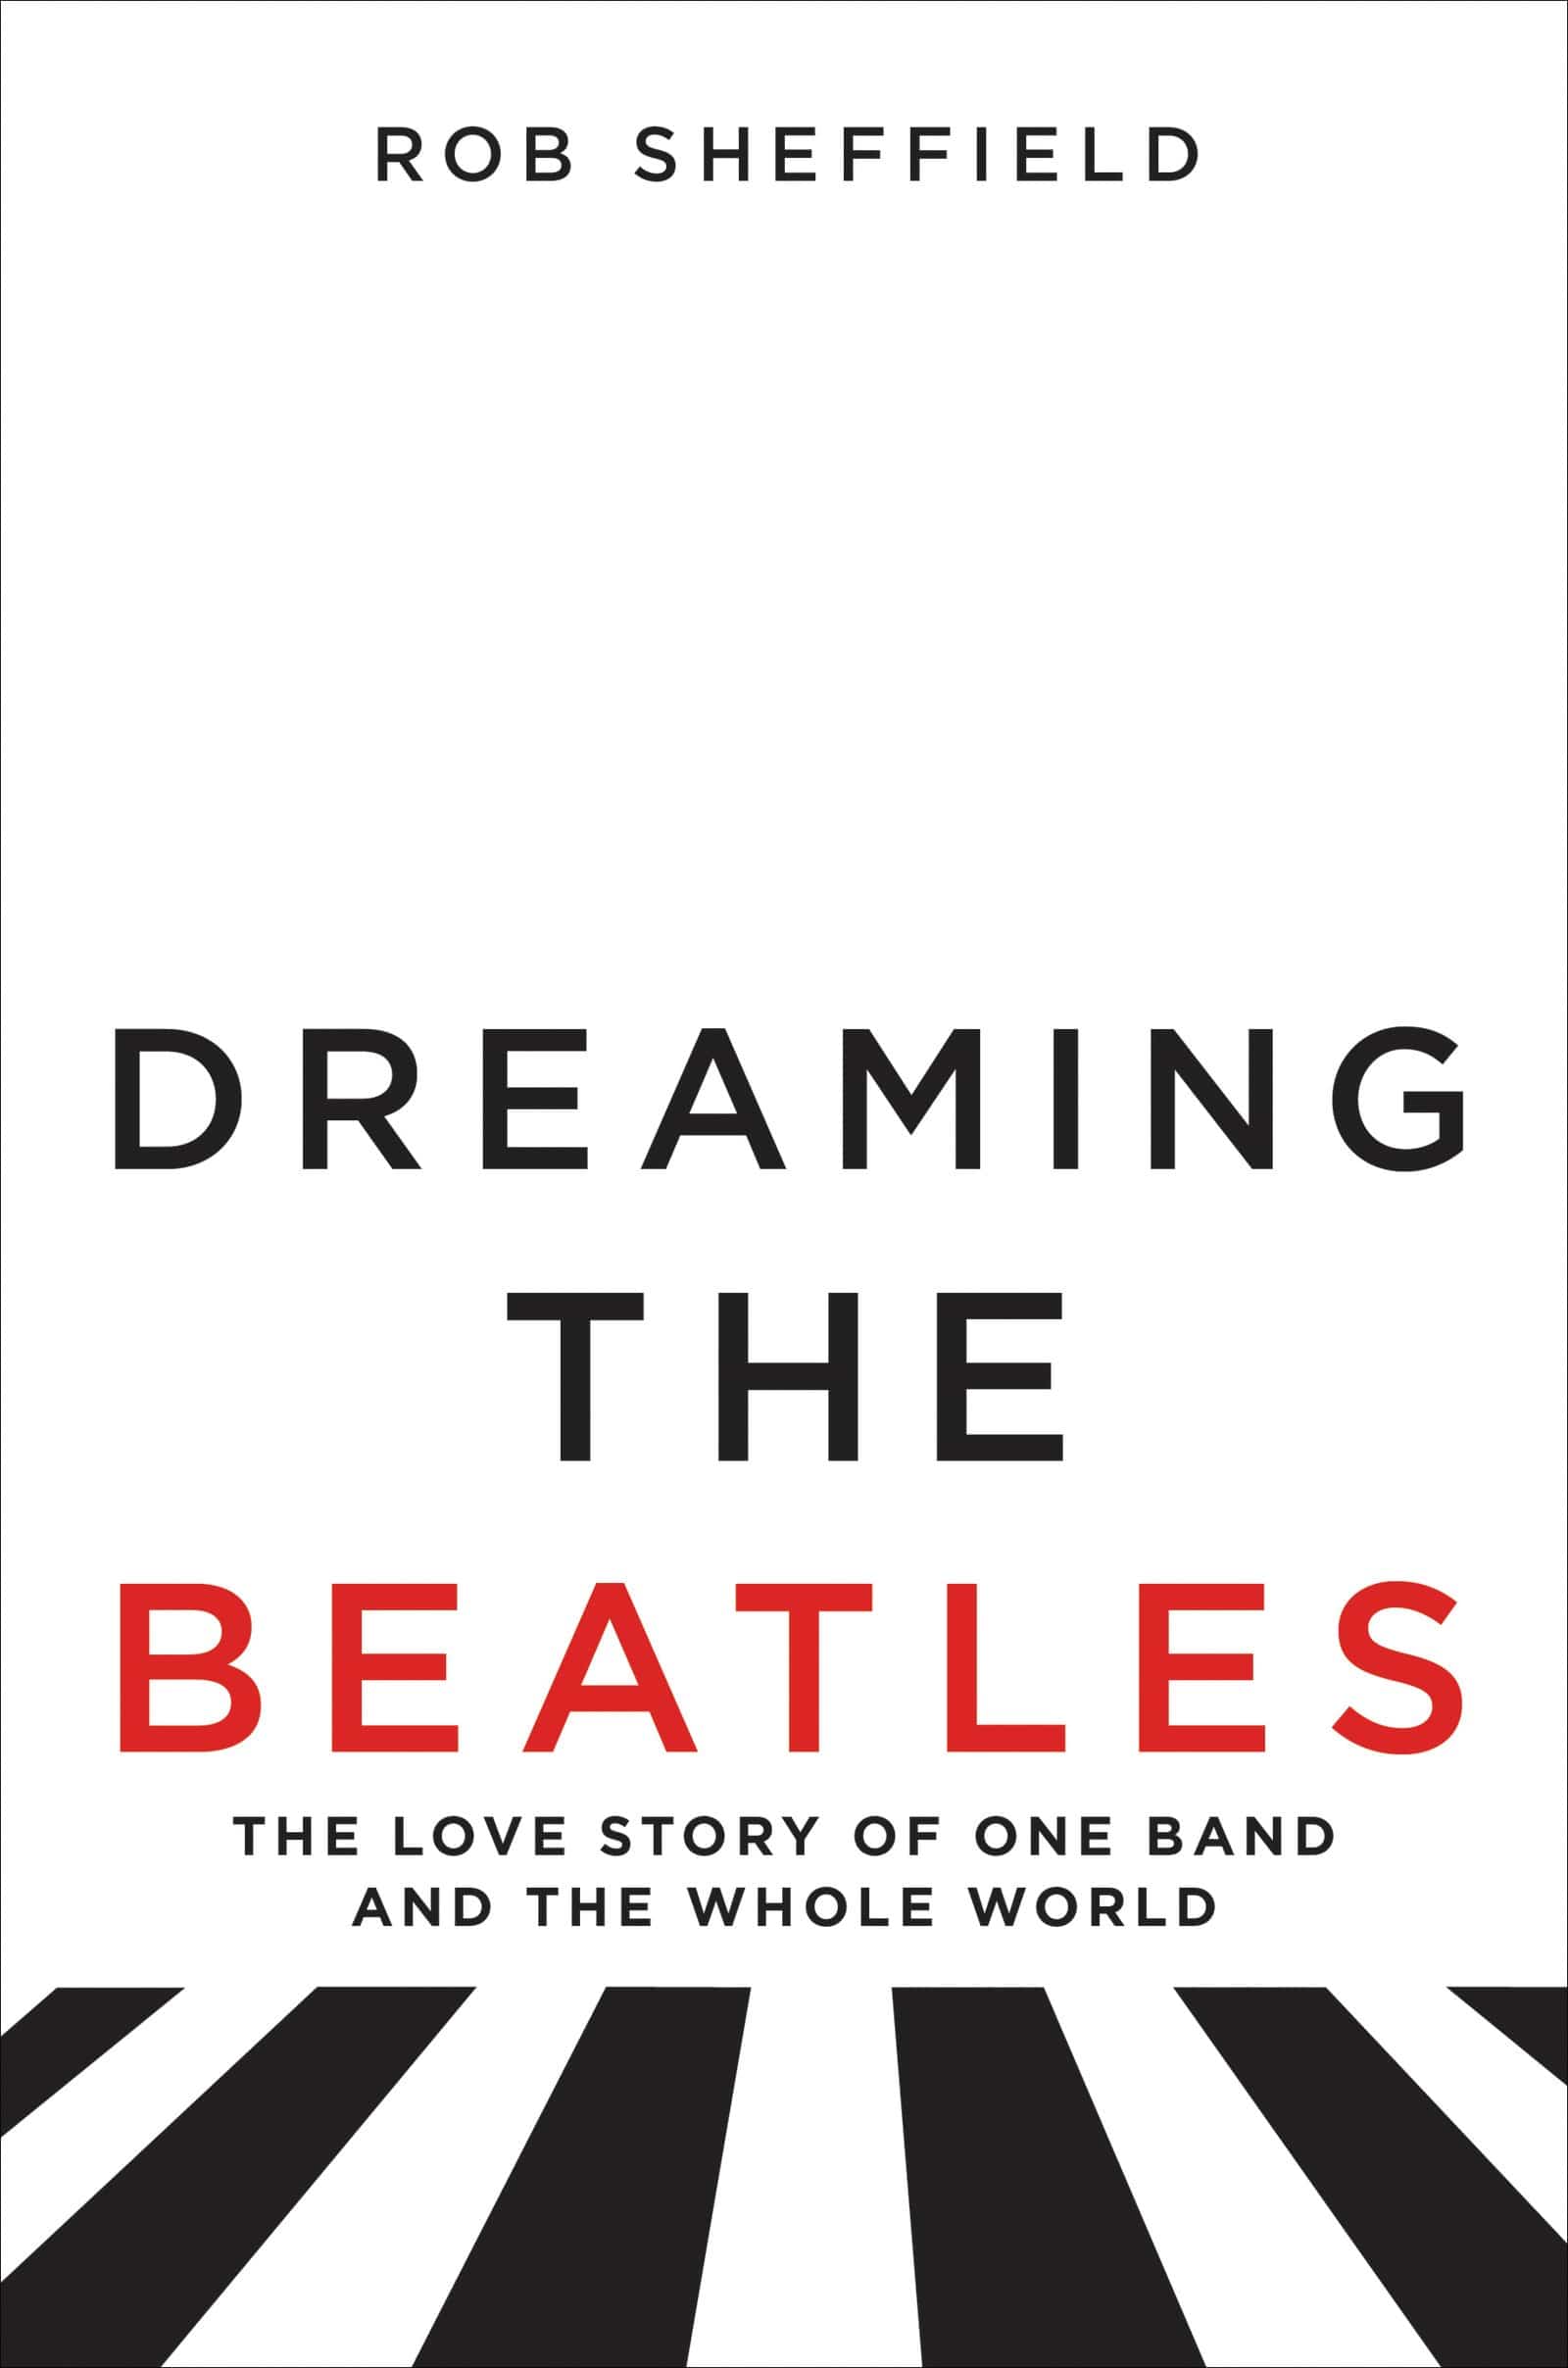 The cover of Dreaming the Beatles